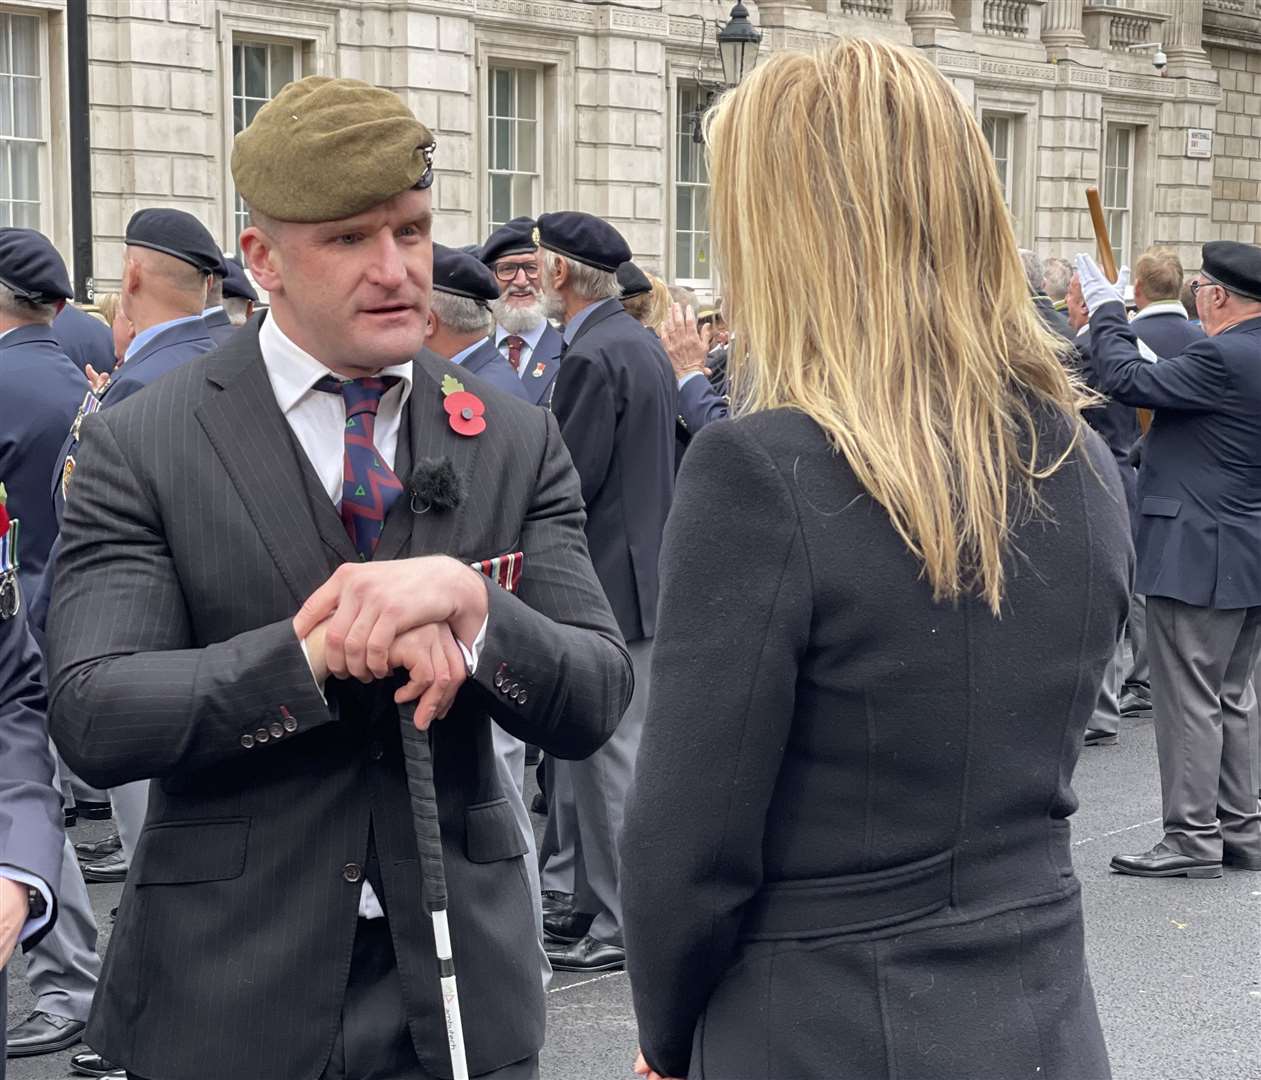 Canterbury veteran Rob Long speaking to Sophie Raworth before he marched at the Cenotaph in 2021